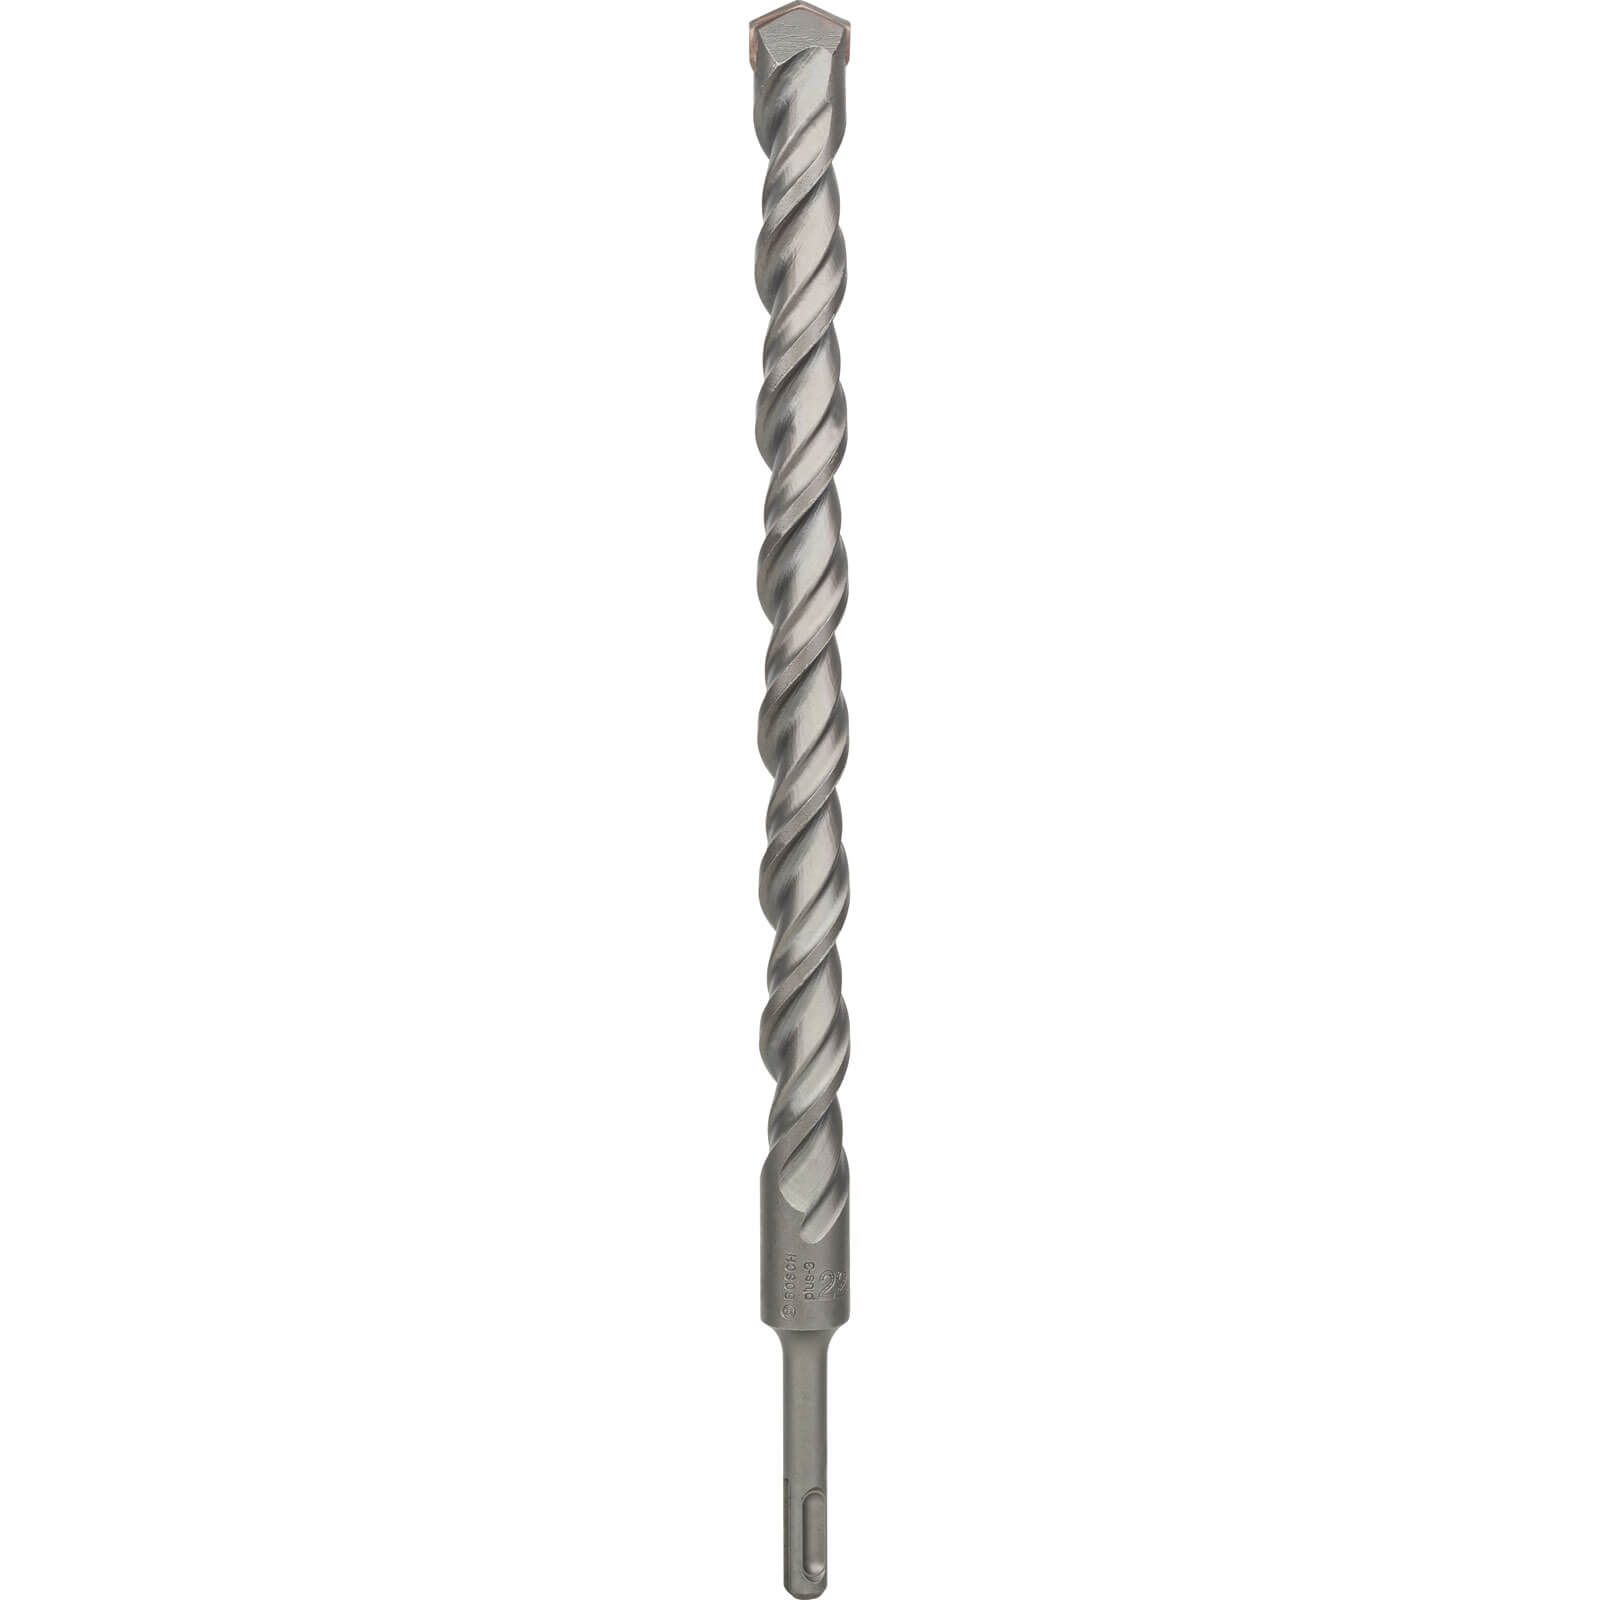 Image of Bosch Series 3 SDS Plus Masonry Drill Bit 22mm 350mm Pack of 1